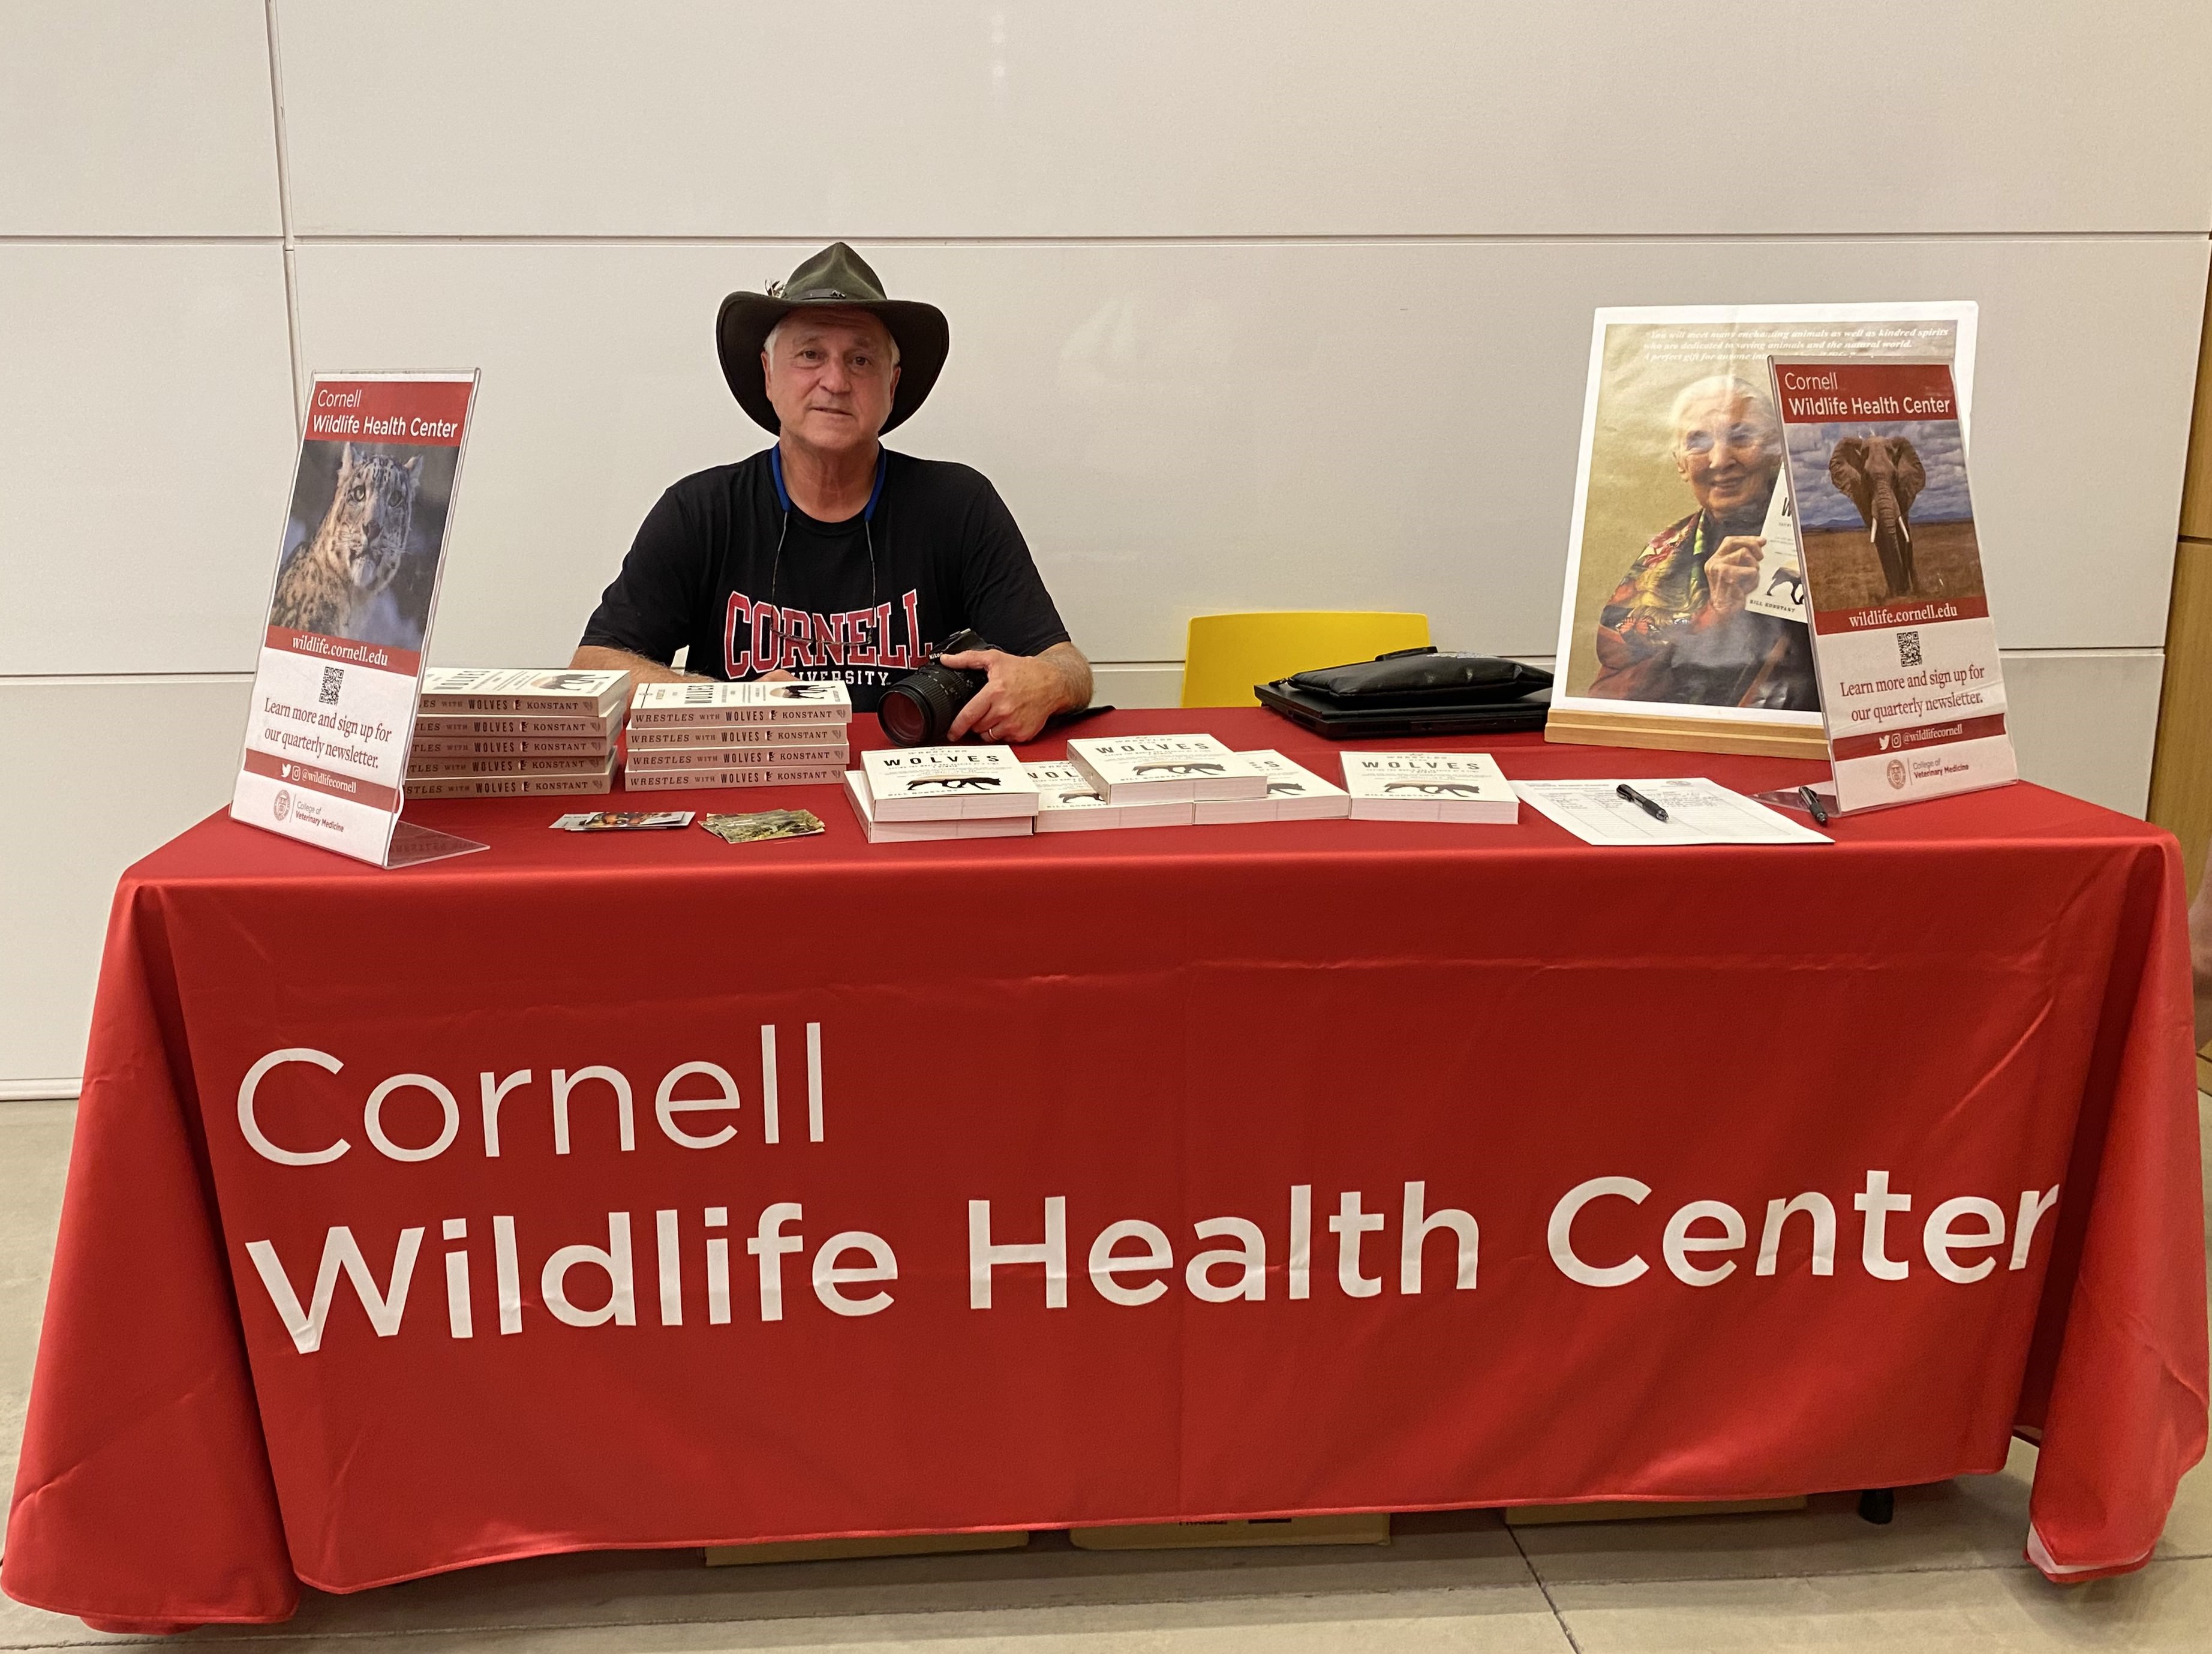 Bill Konstant at book signing table with the Cornell Wildlife Health Center